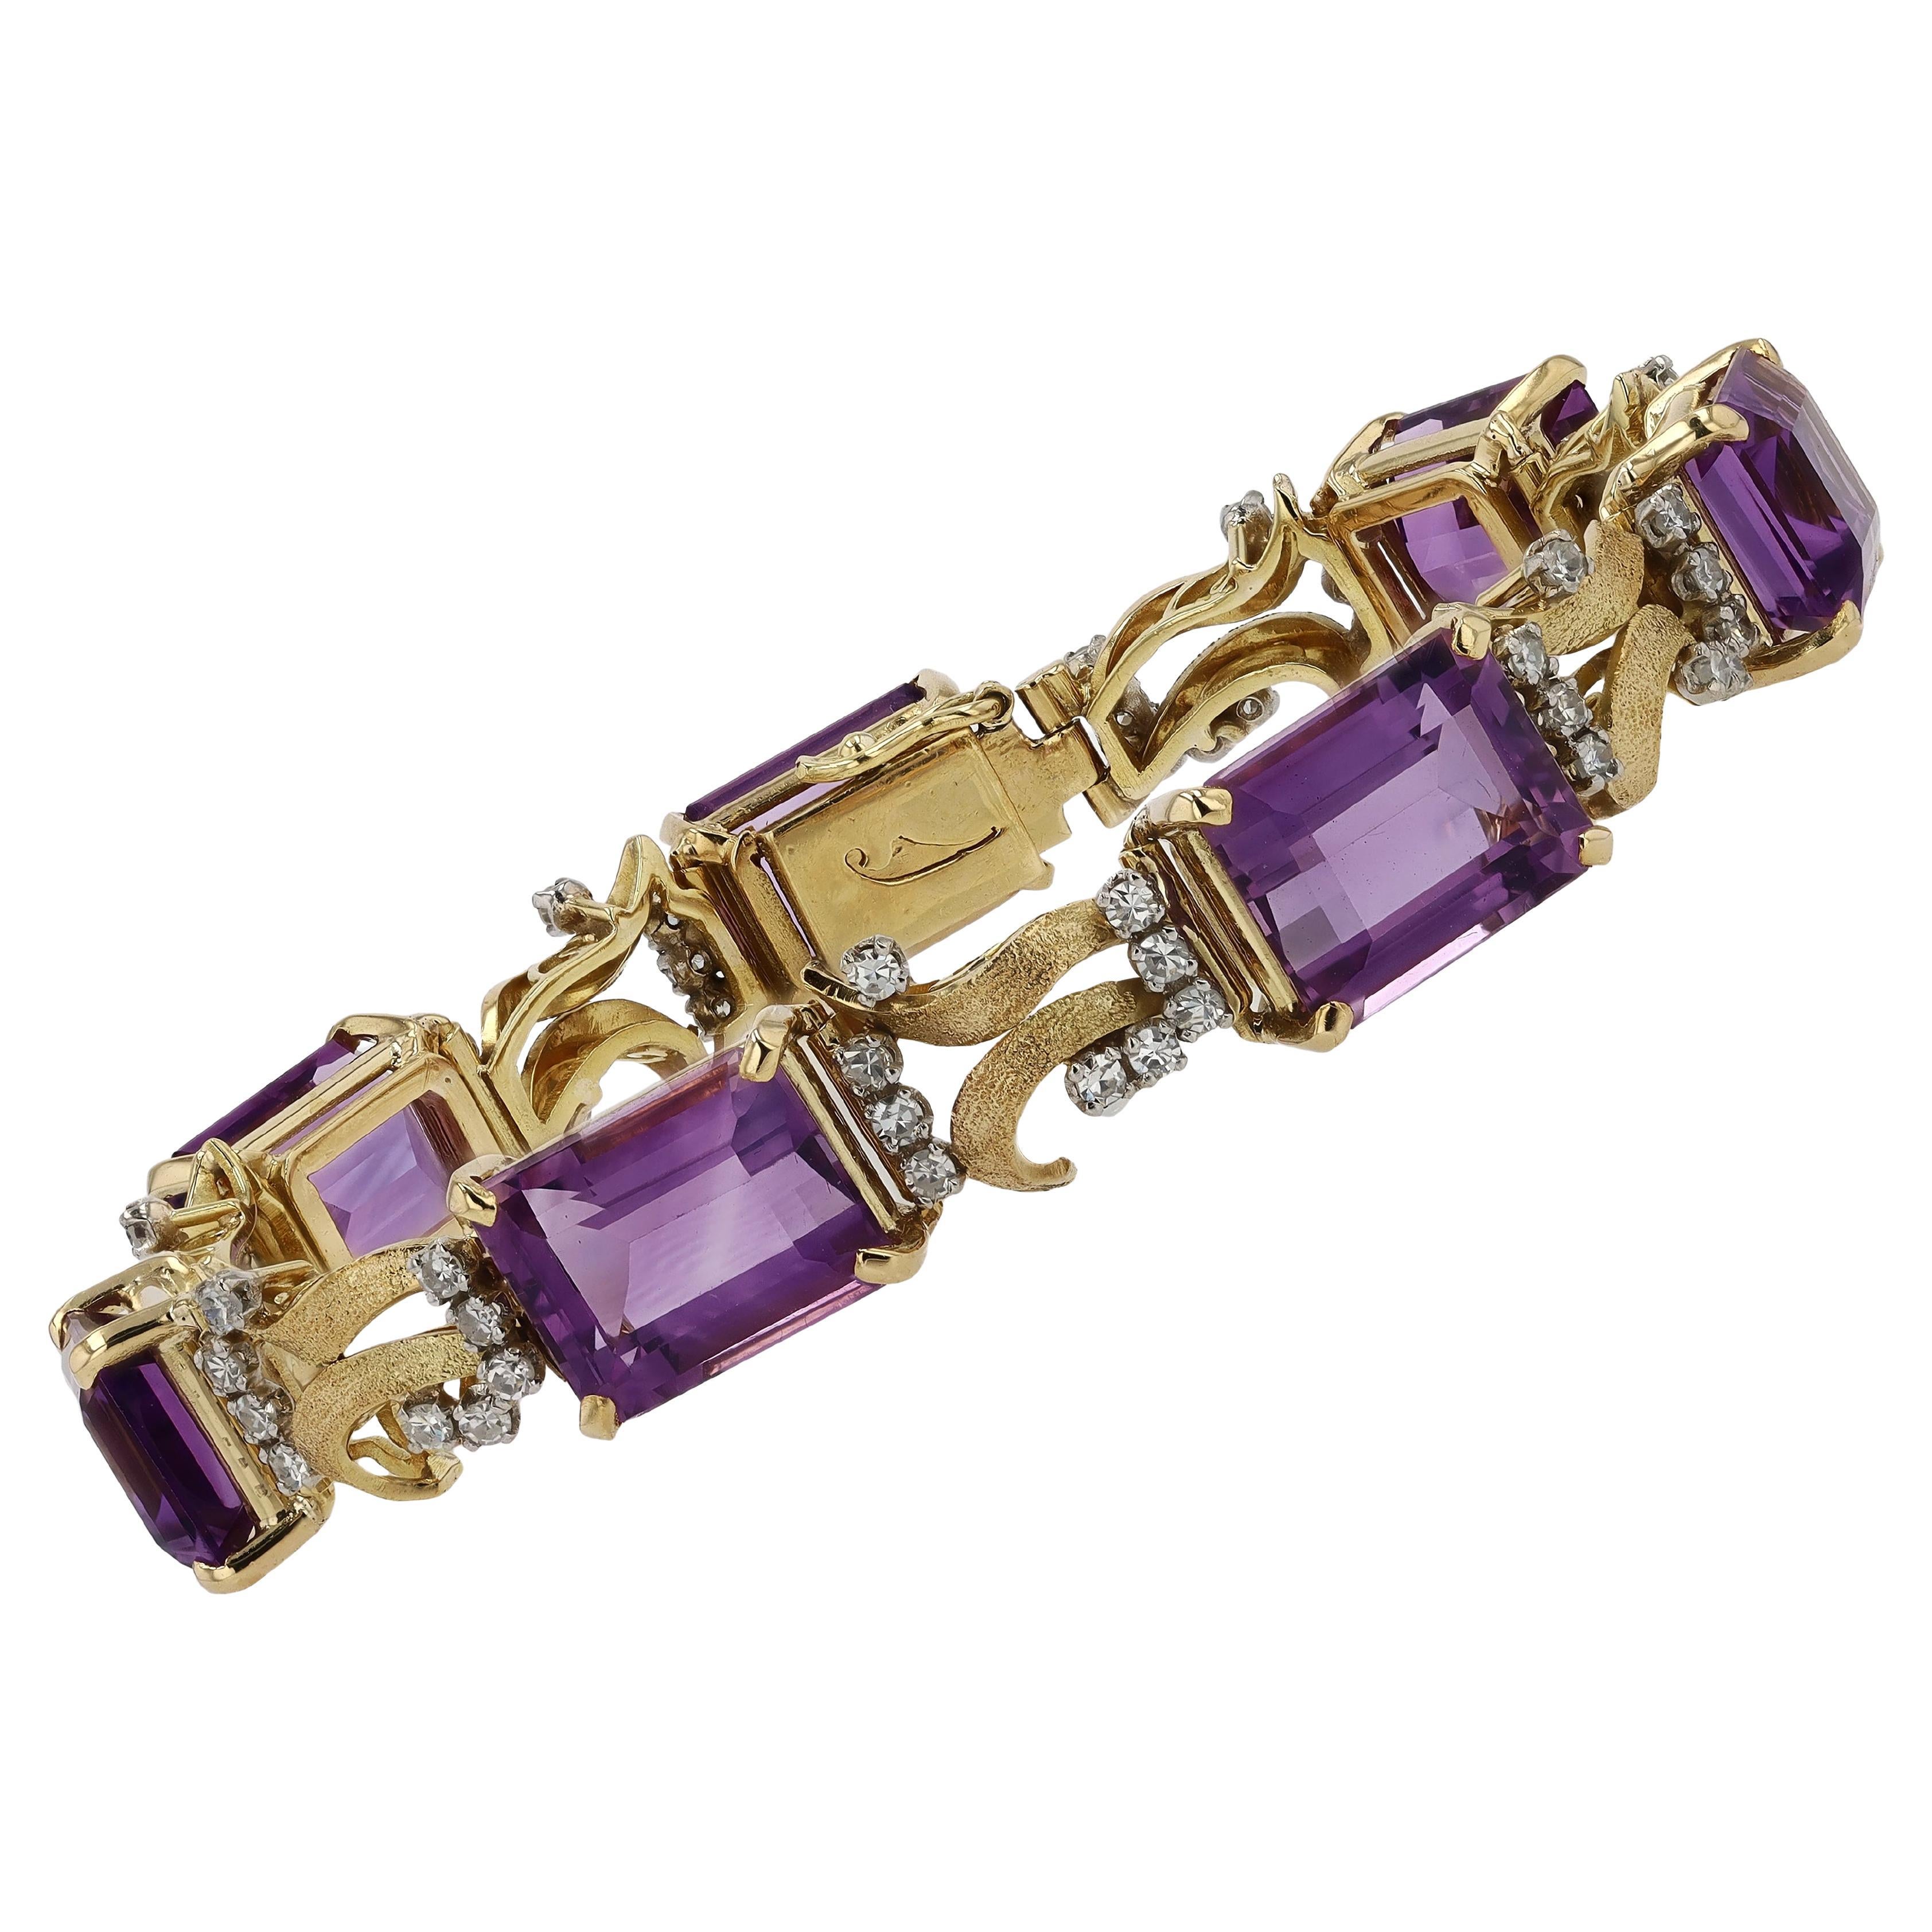 This authentic 1940's Retro period stunner is the quintessential vintage gemstone bracelet. The luxurious, textured 18 karat yellow gold links delicately embrace 30 carats of soothing, rich, royal purple amethysts. Accented with 63 glimmering